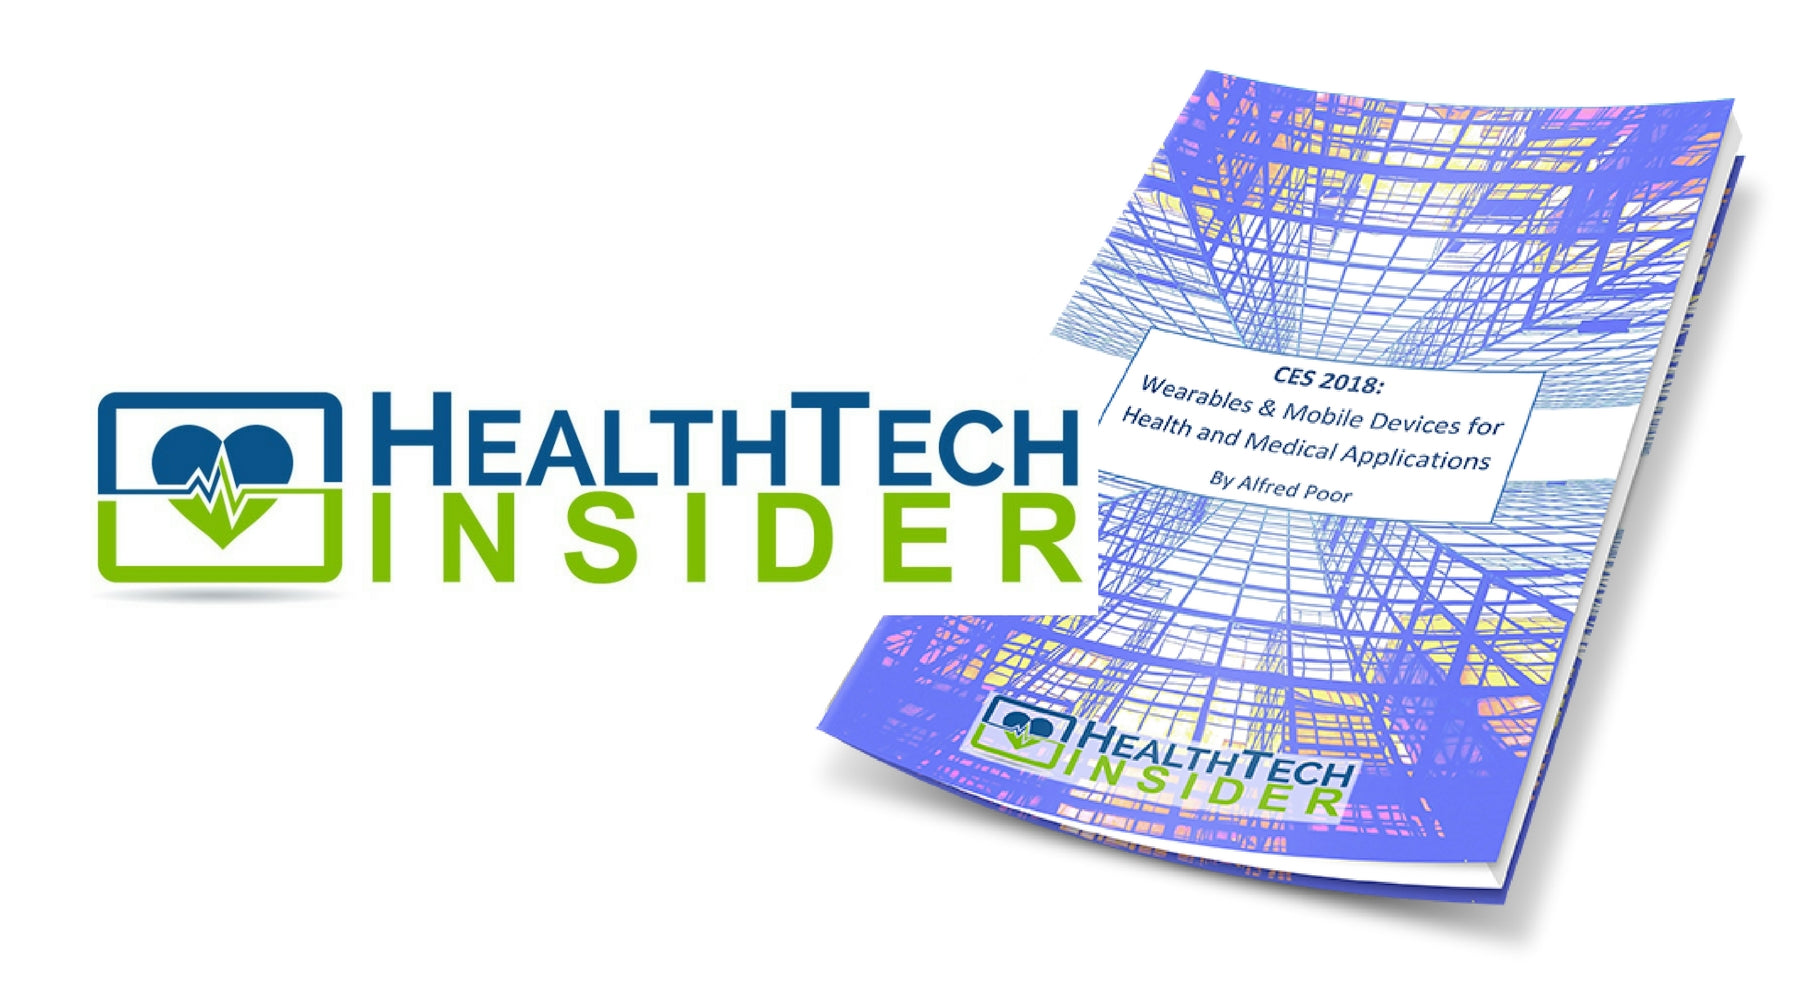 Health Tech Insider - CES 2018: Wearables & Mobile Devices for Health & Medical Applications